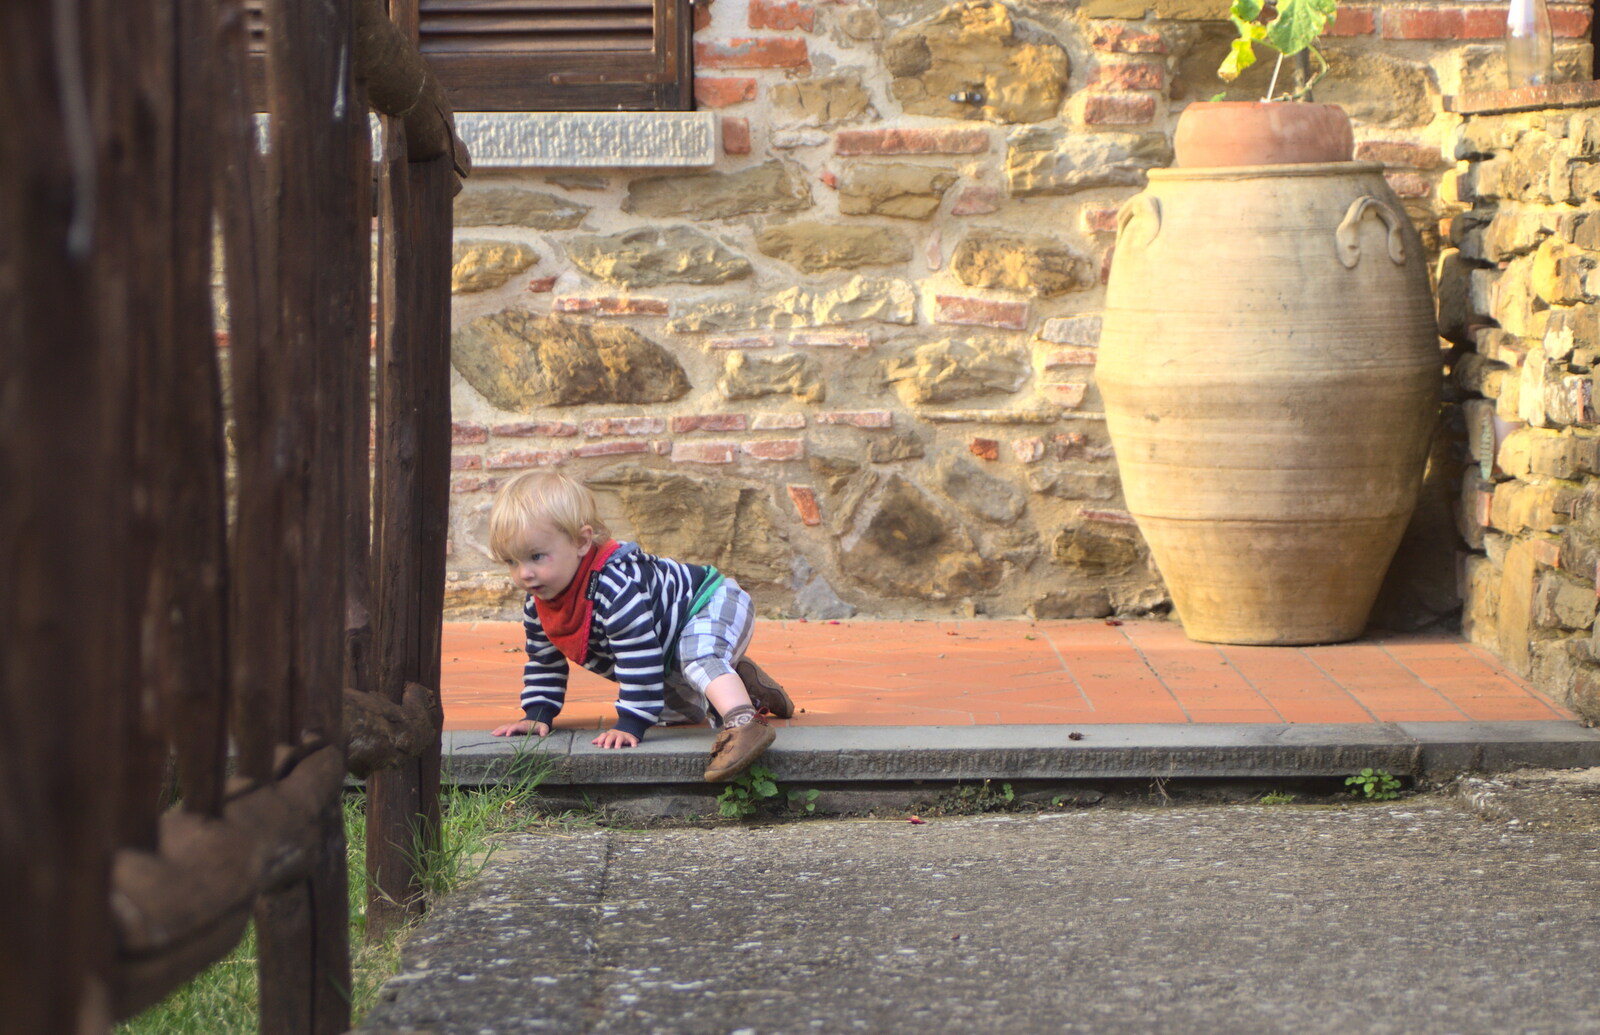 A Tuscan Winery and a Trip to Siena, Tuscany, Italy - 10th June 2013: Harry on the path